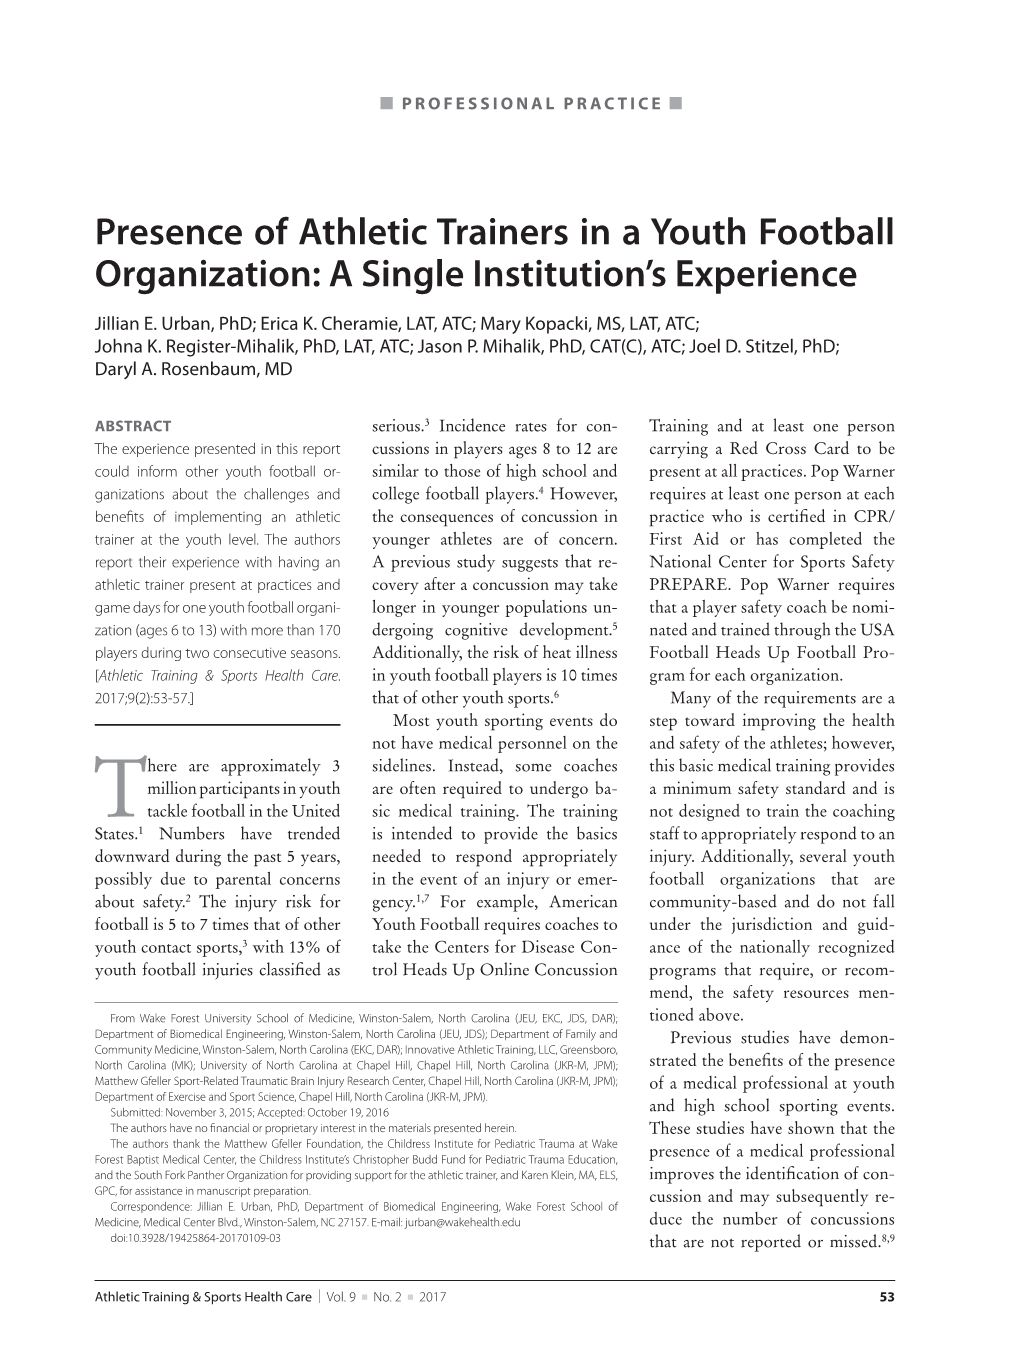 Presence of Athletic Trainers in a Youth Football Organization: a Single Institution’S Experience